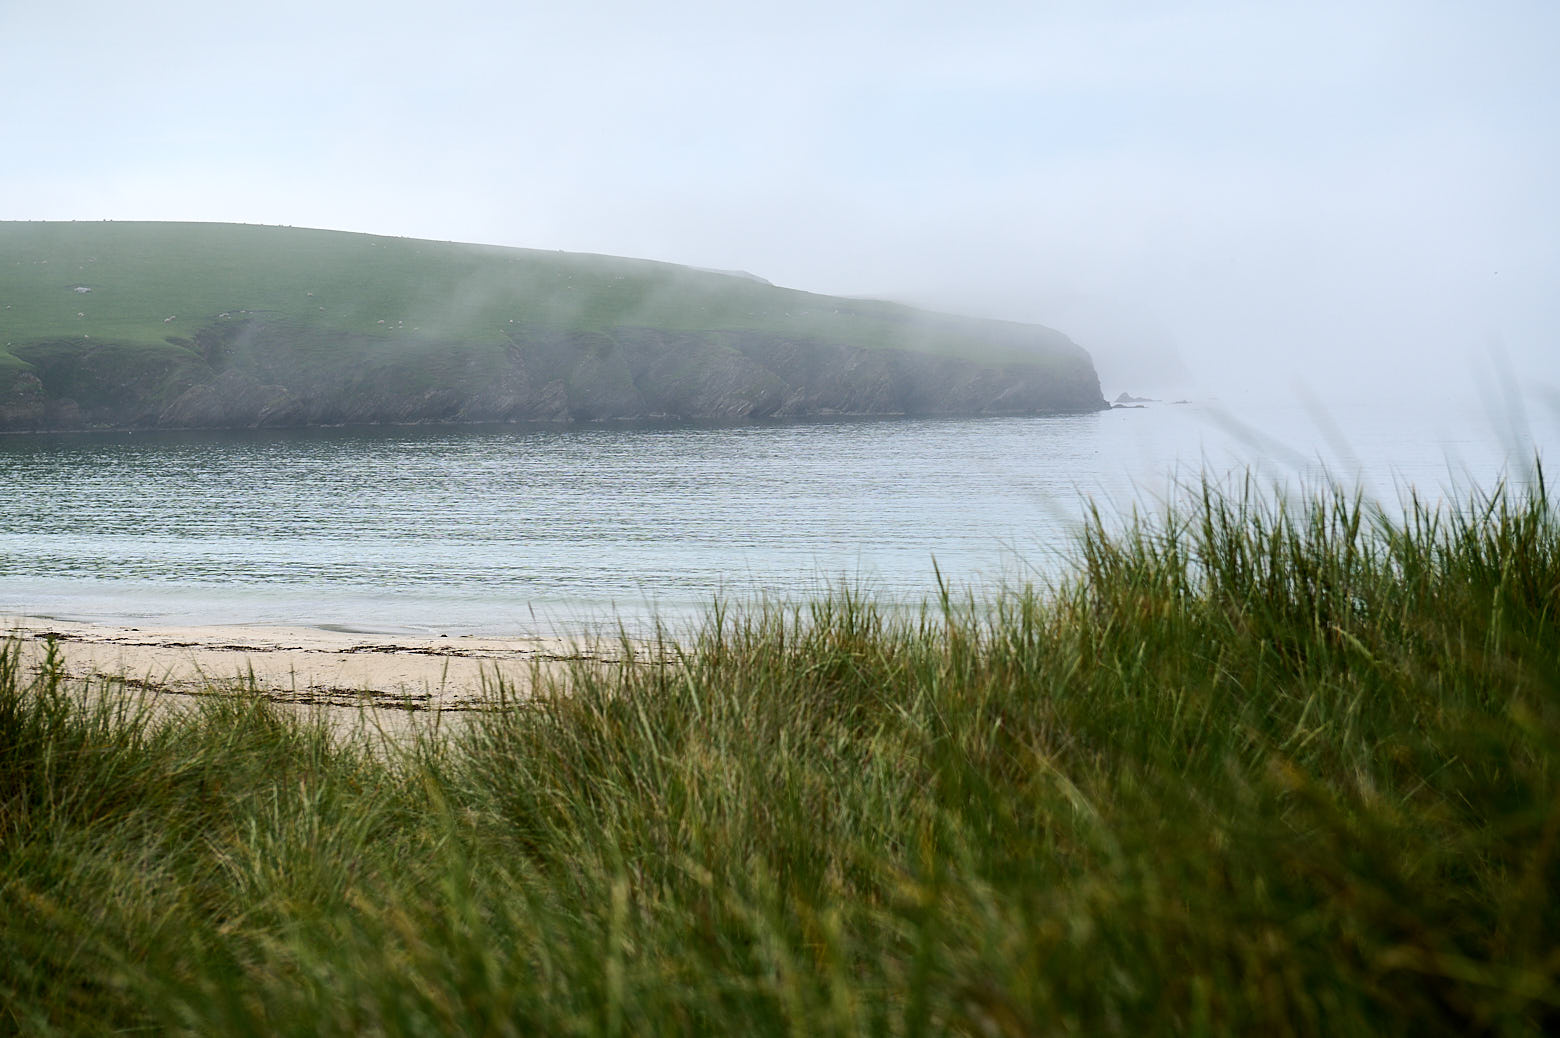 St. Ninians Isle under a thick blanket of fog.